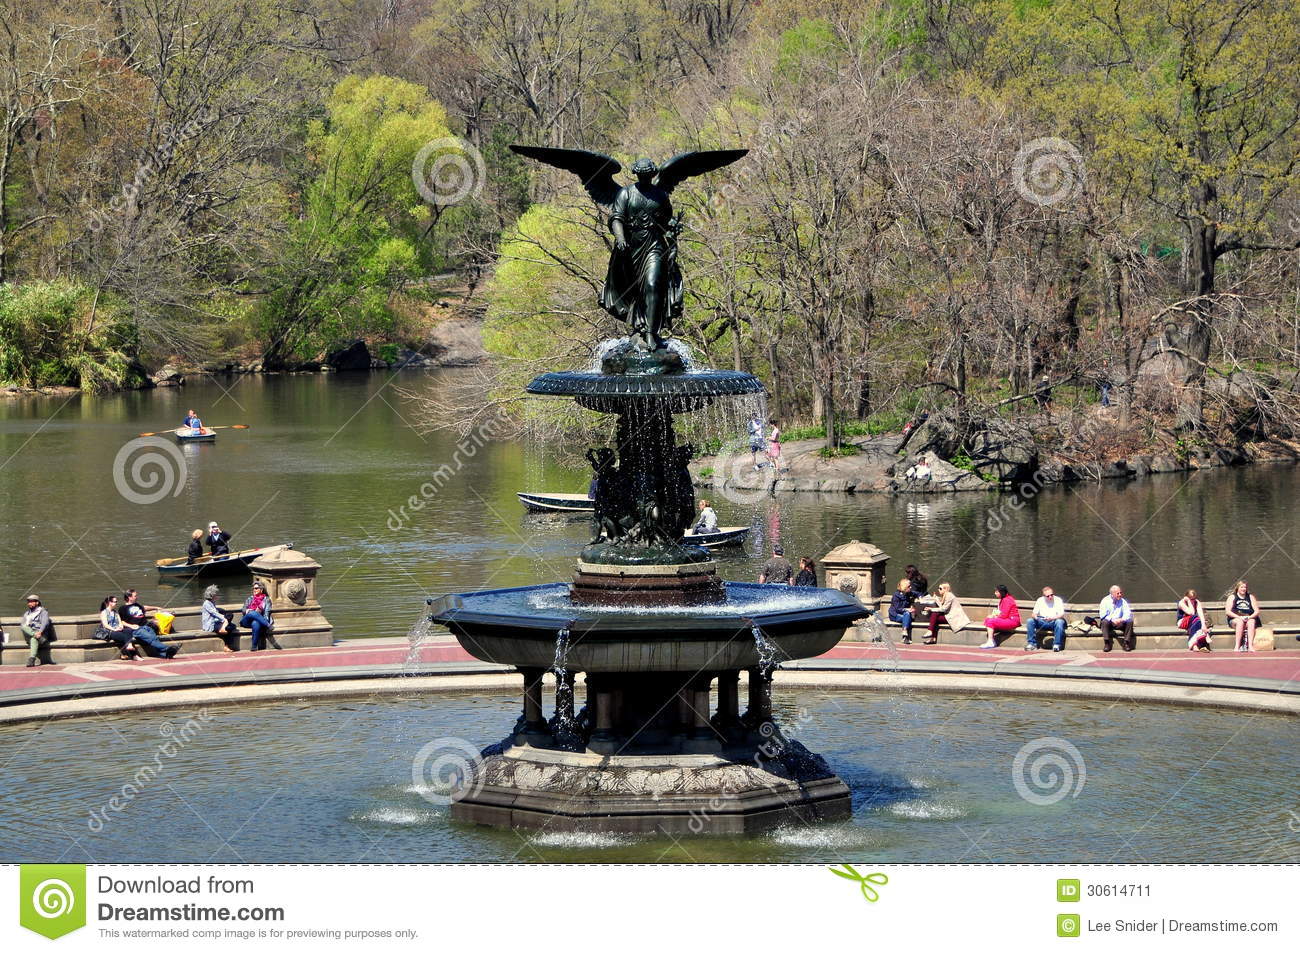 The Beautiful Bethesda Fountain And Plaza Adjacent To The Central Park